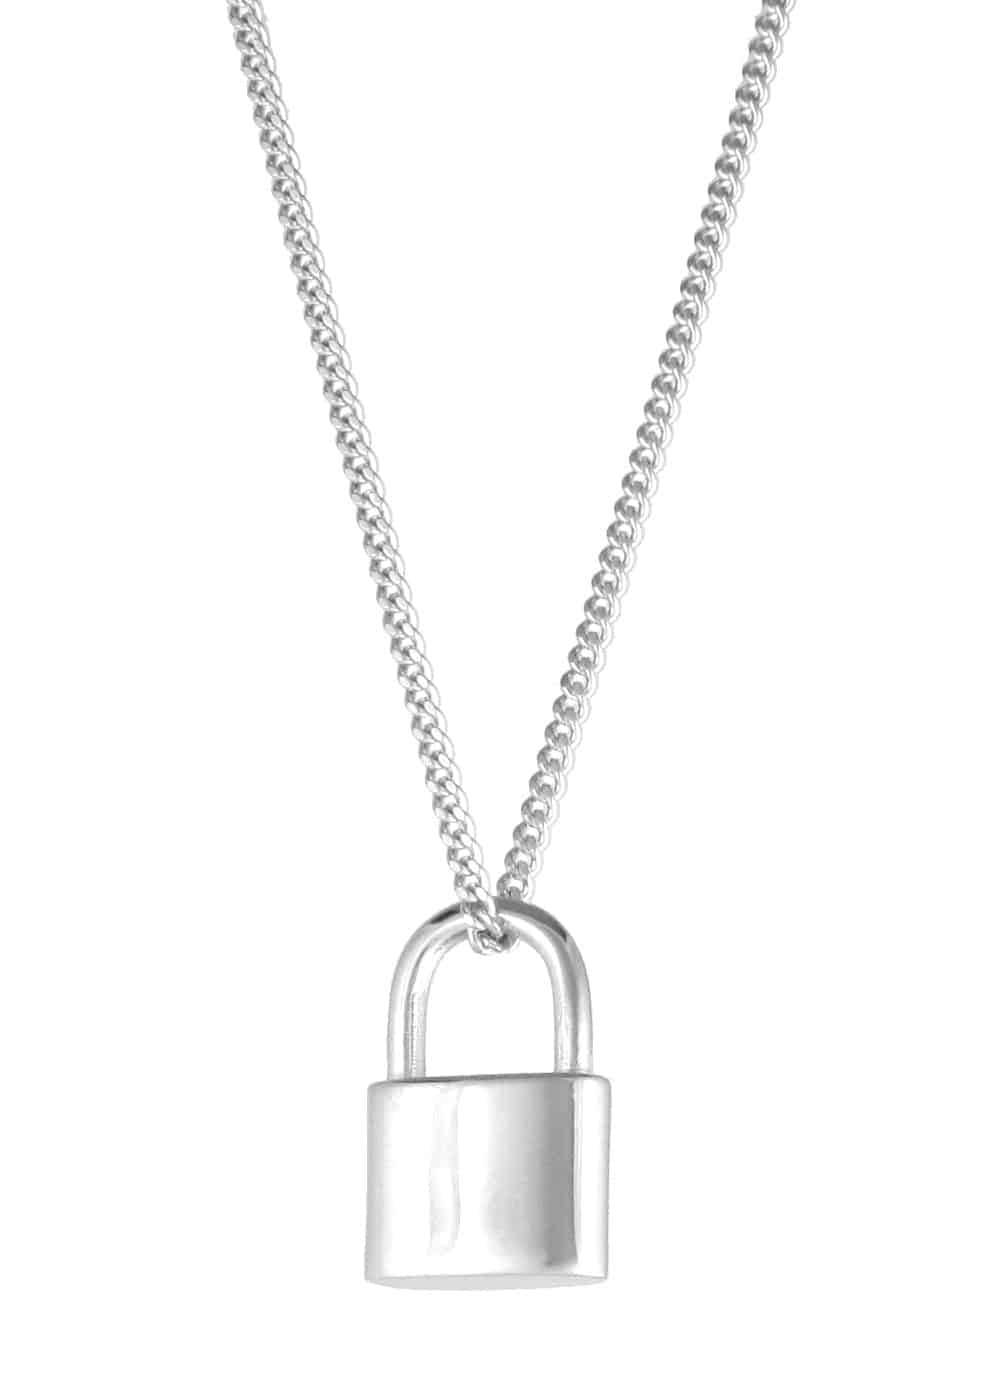 Small Padlock Necklace Silver | Sterling Silver & Gold Vermeil Jewellery | Unisex jewellery